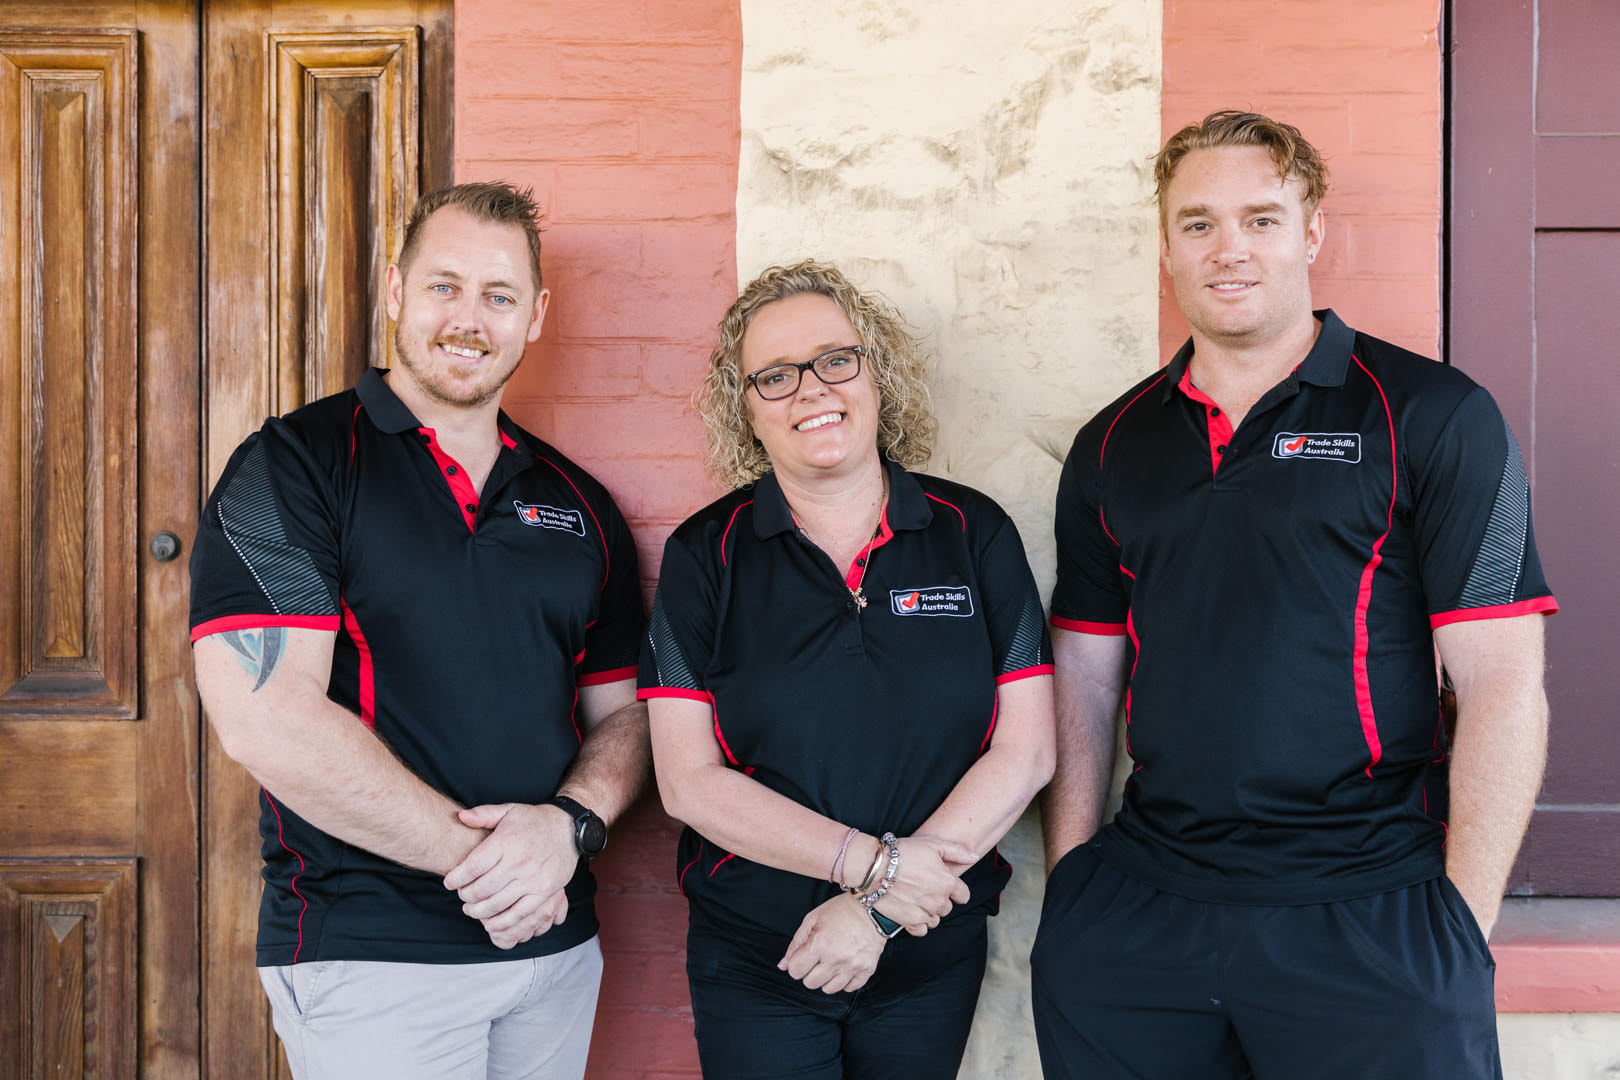 Three of the Trade Skills Australia team in black and red shirts posing and smiling